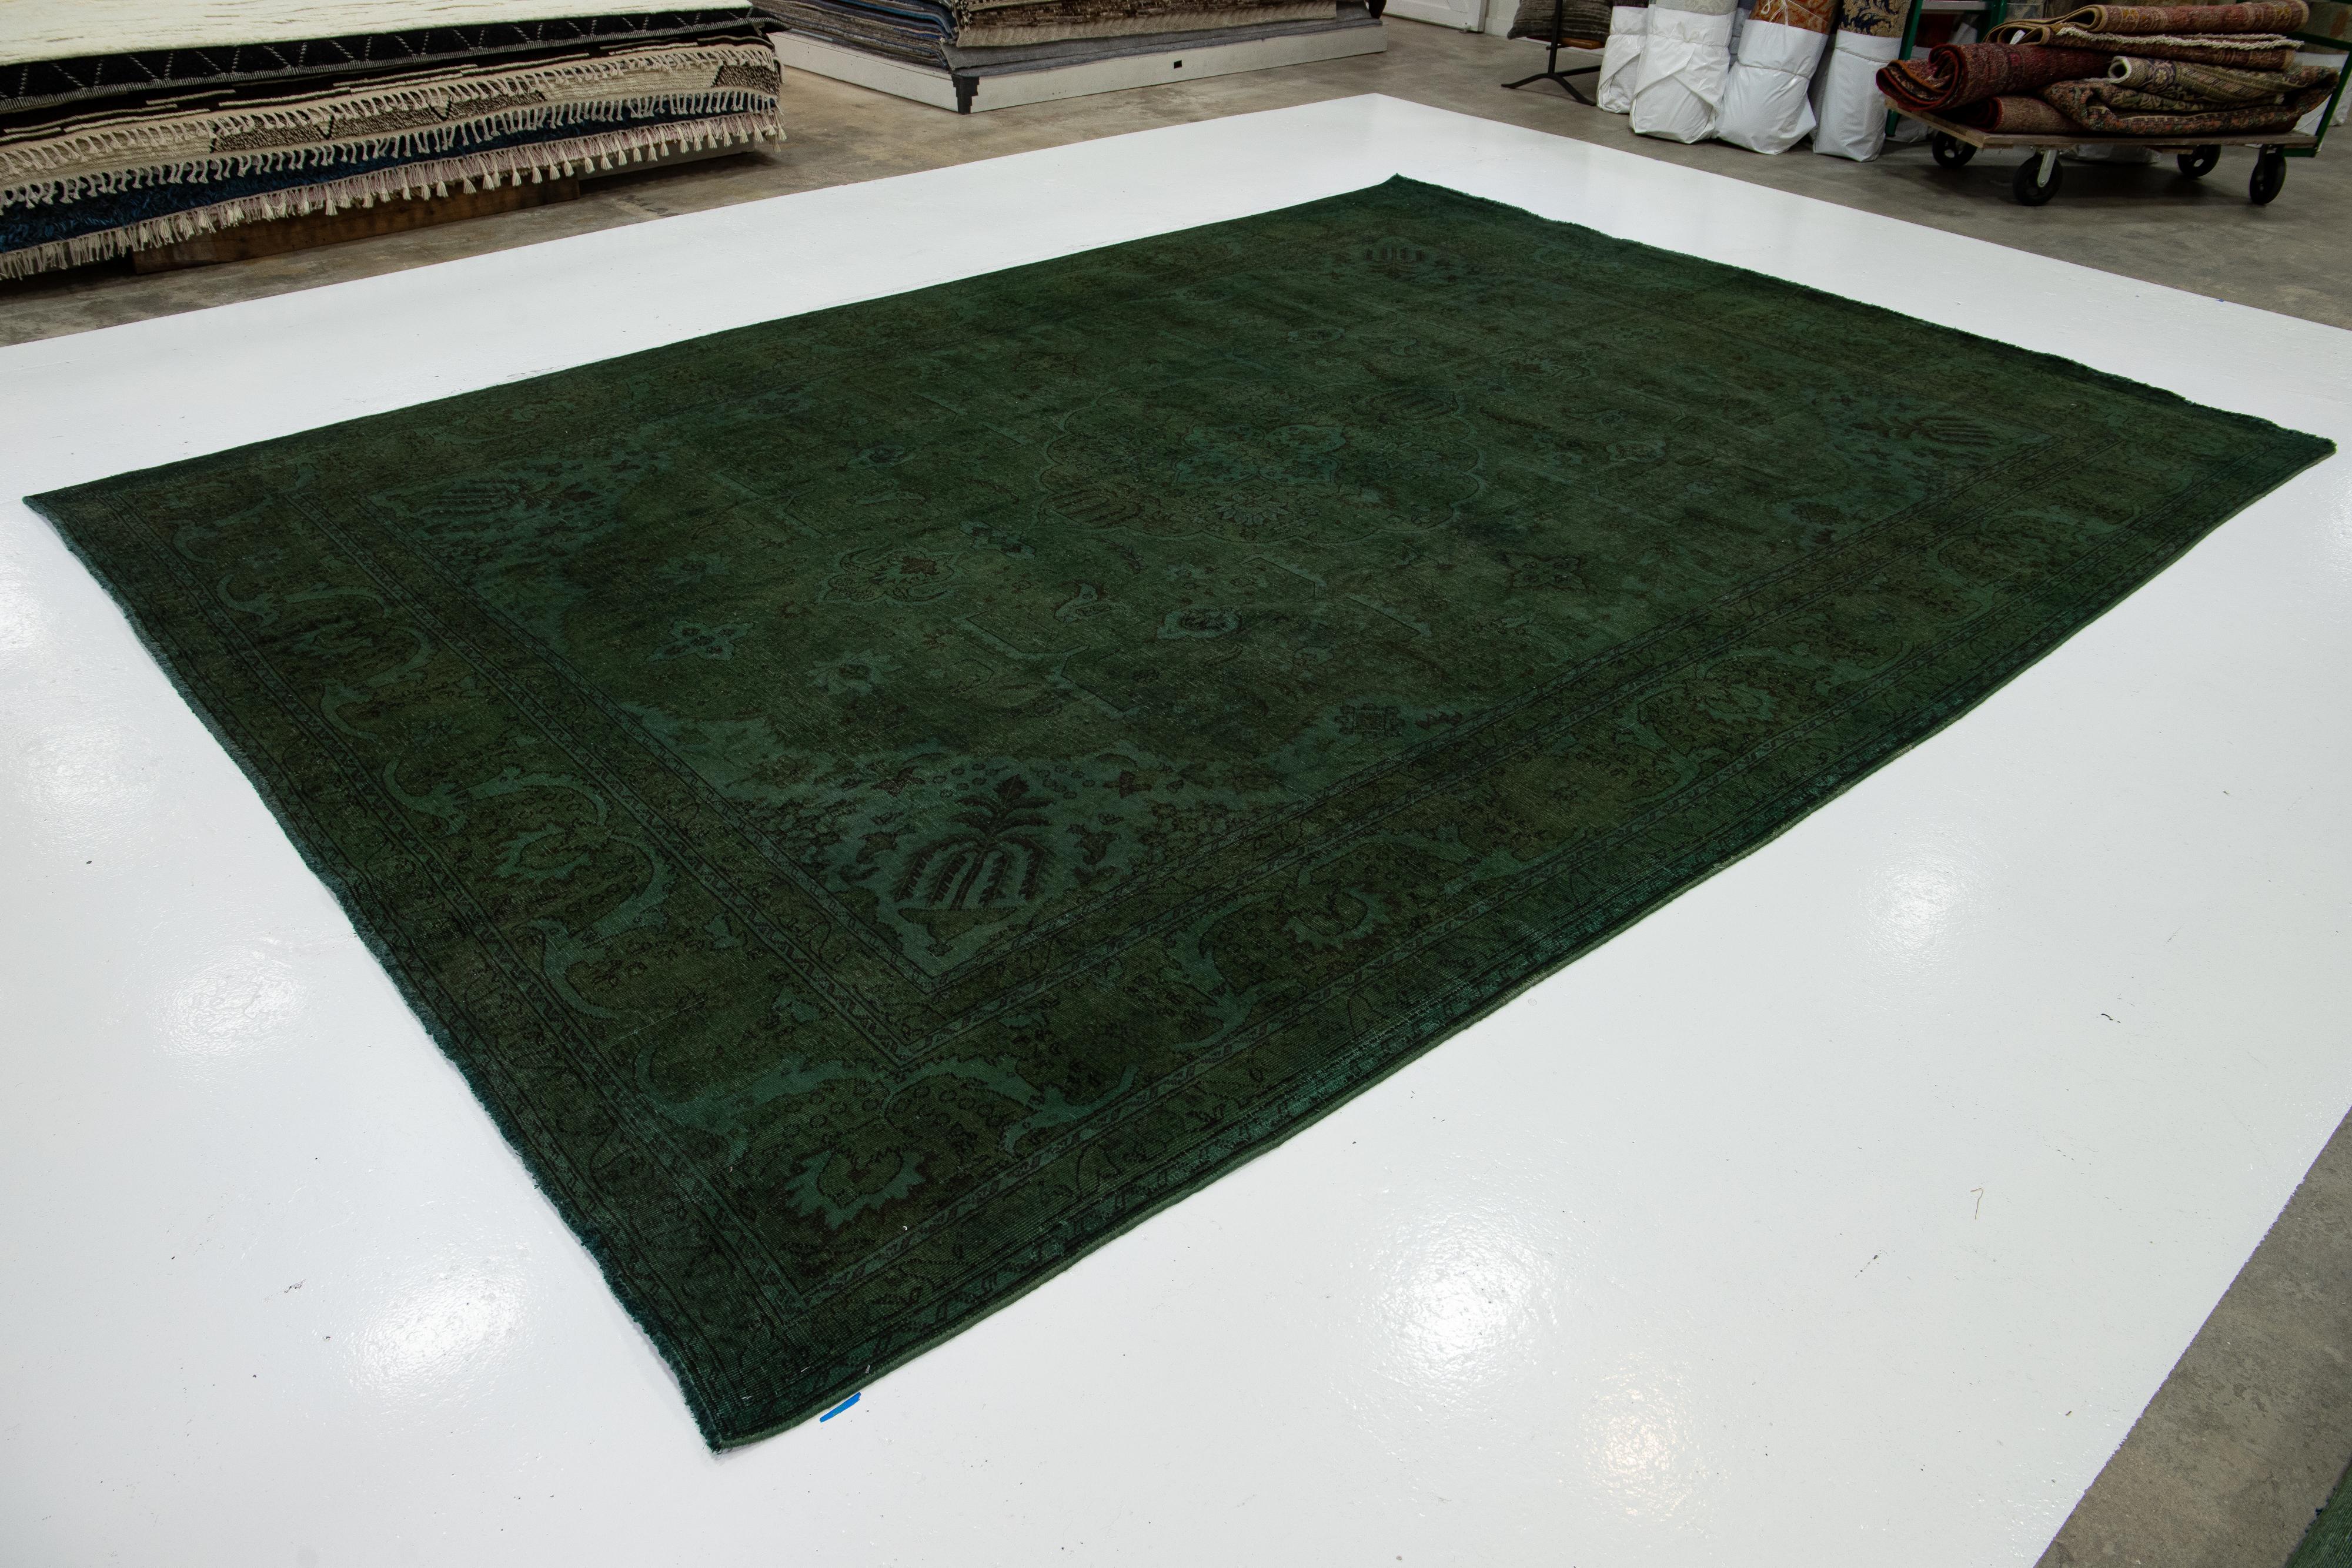 11 x 16 Antique Overdyed Persian Wool Rug With Medallion Design In Green In Good Condition For Sale In Norwalk, CT